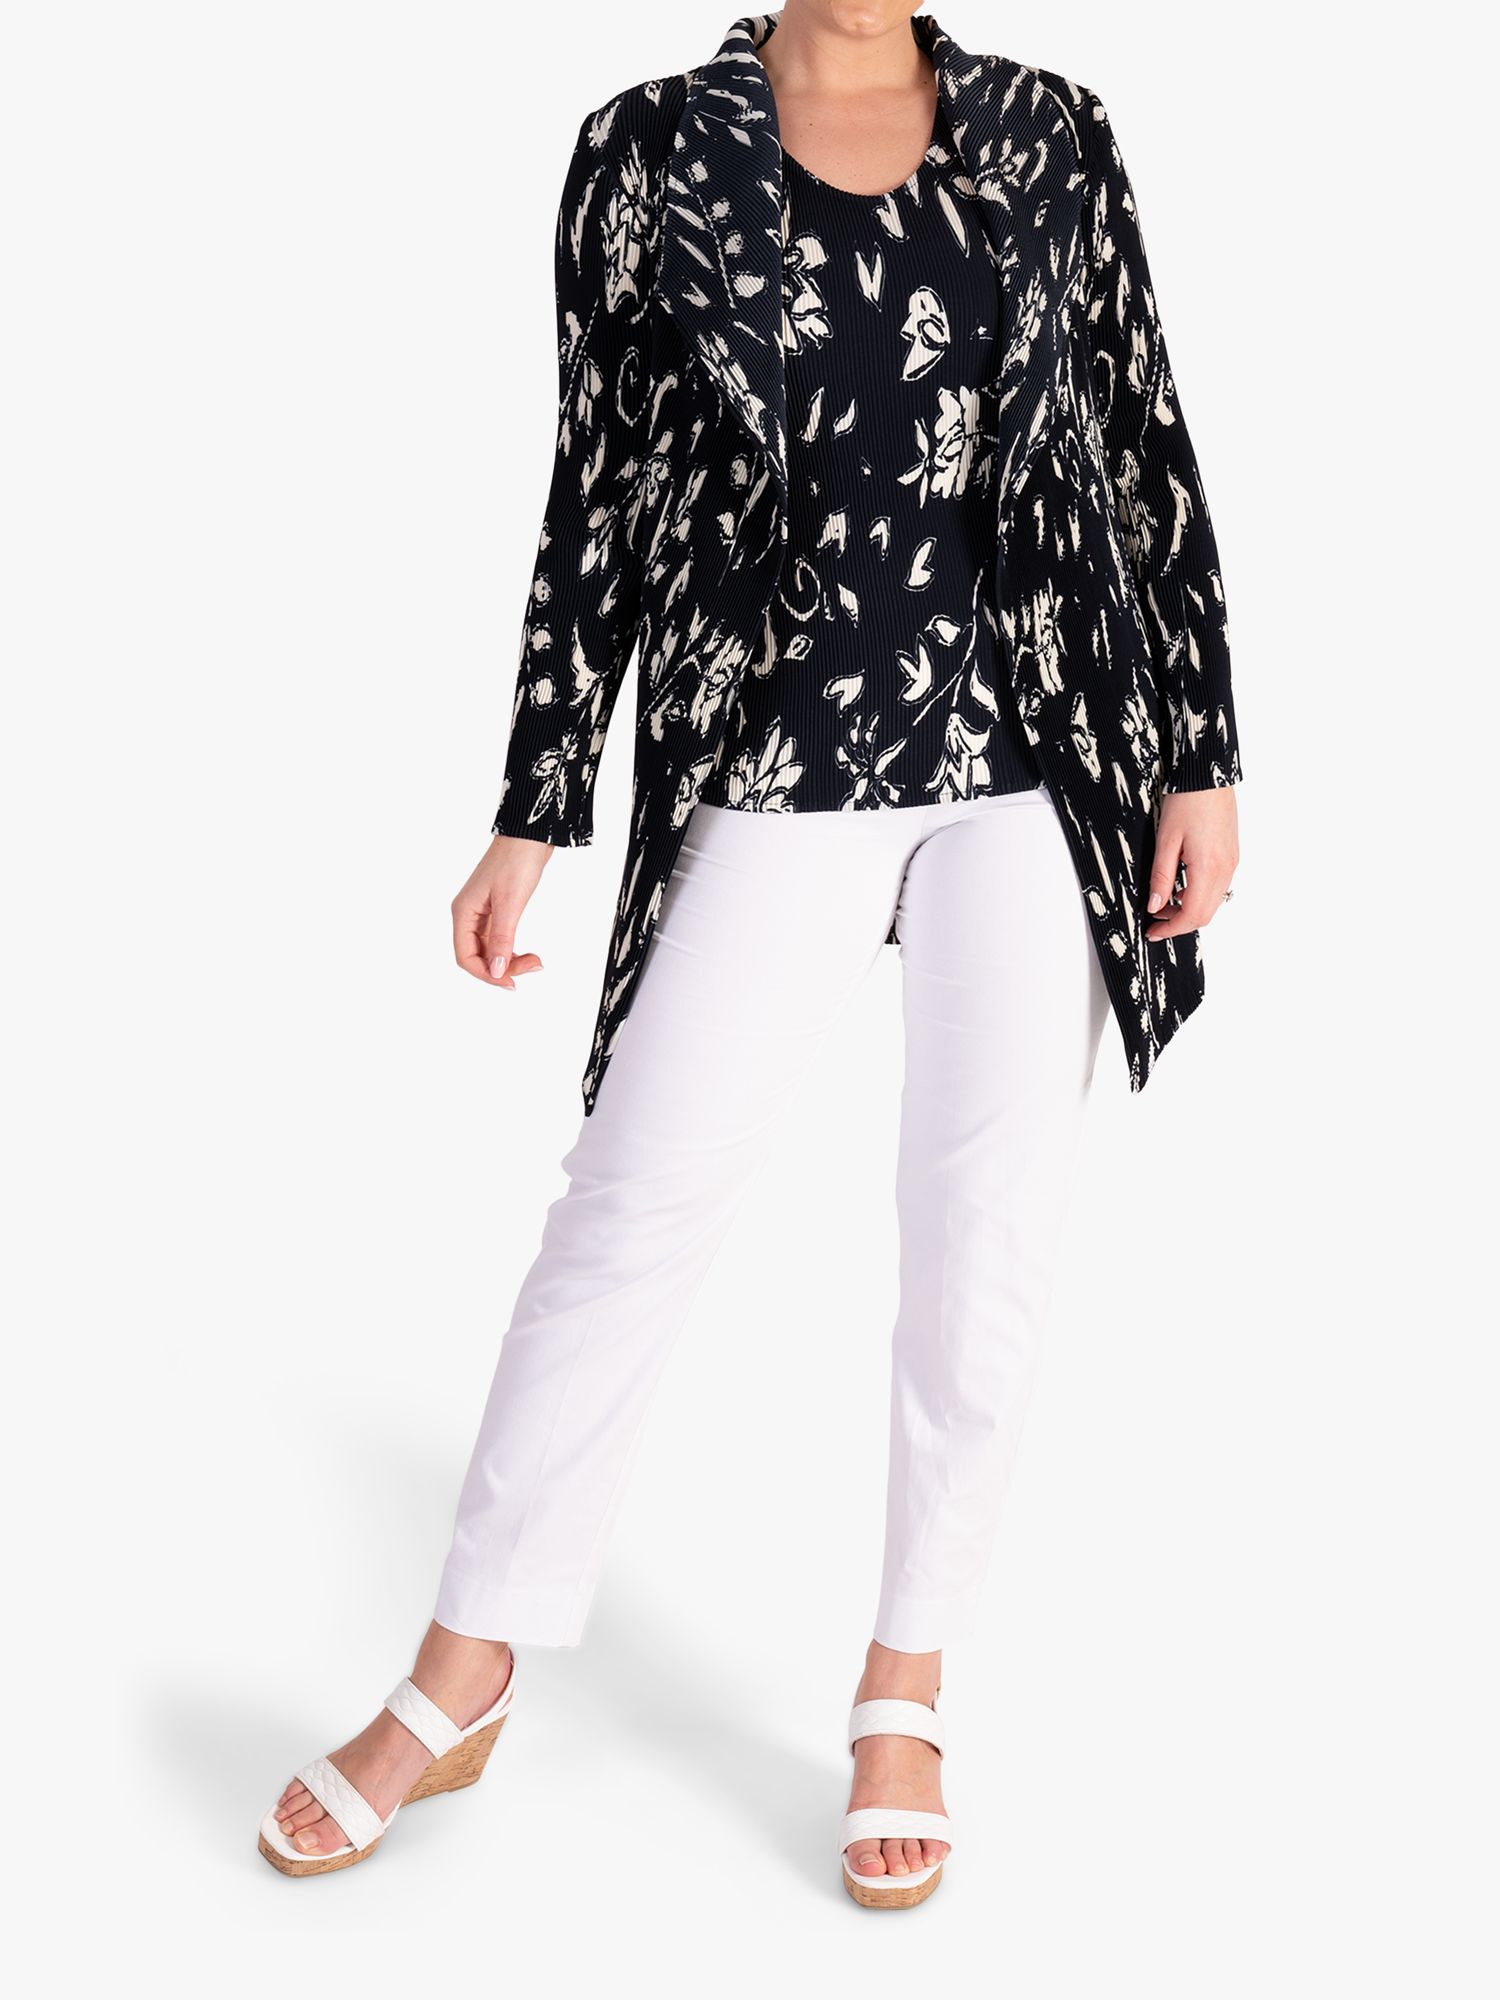 Buy chesca Floral Waterfall Jacket, Navy/Ivory Online at johnlewis.com